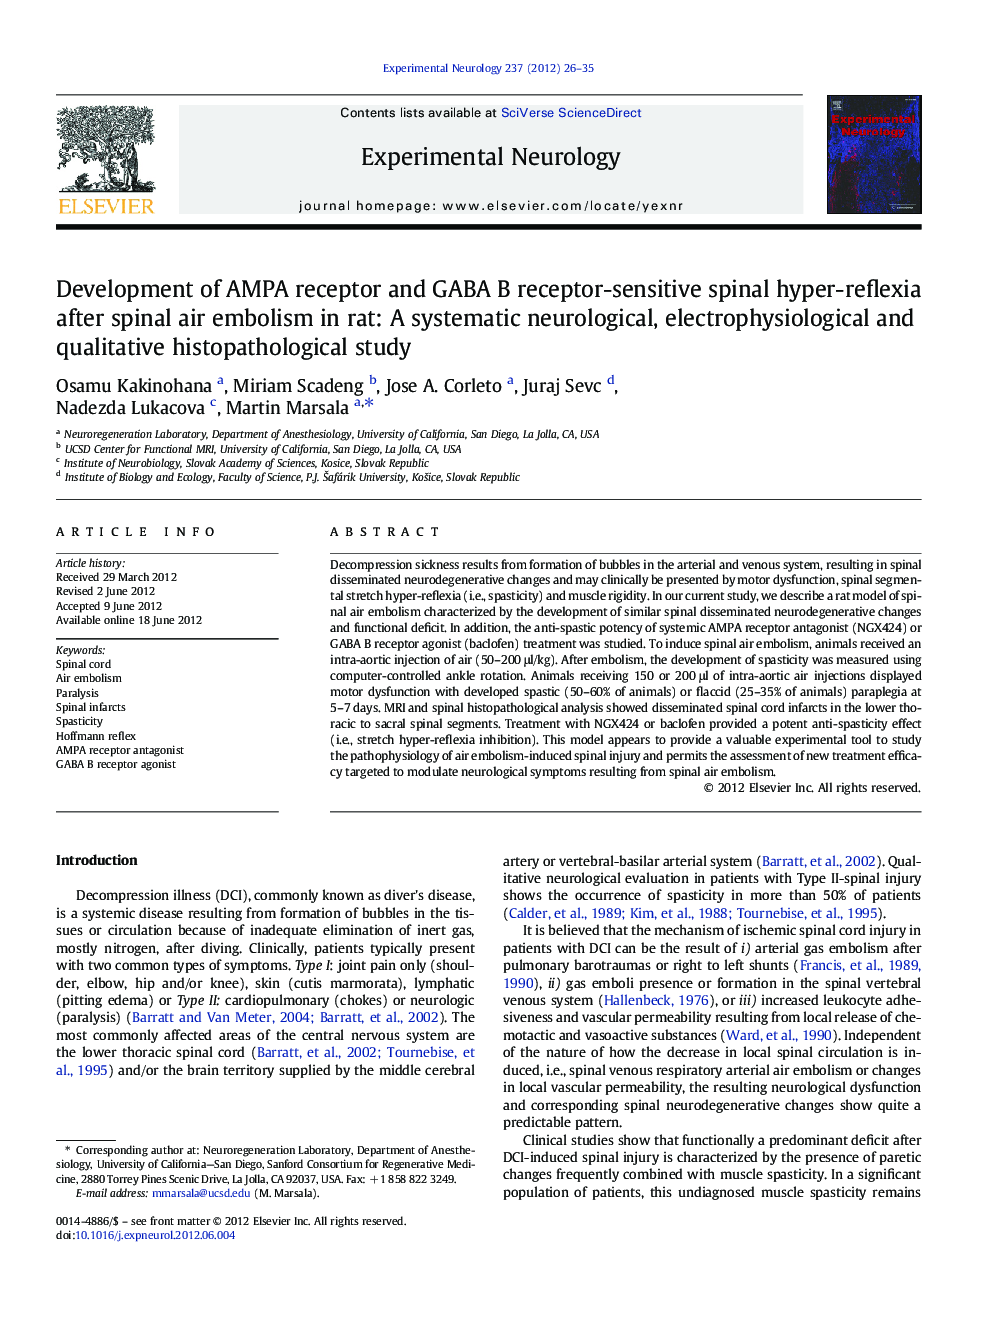 Development of AMPA receptor and GABA B receptor-sensitive spinal hyper-reflexia after spinal air embolism in rat: A systematic neurological, electrophysiological and qualitative histopathological study